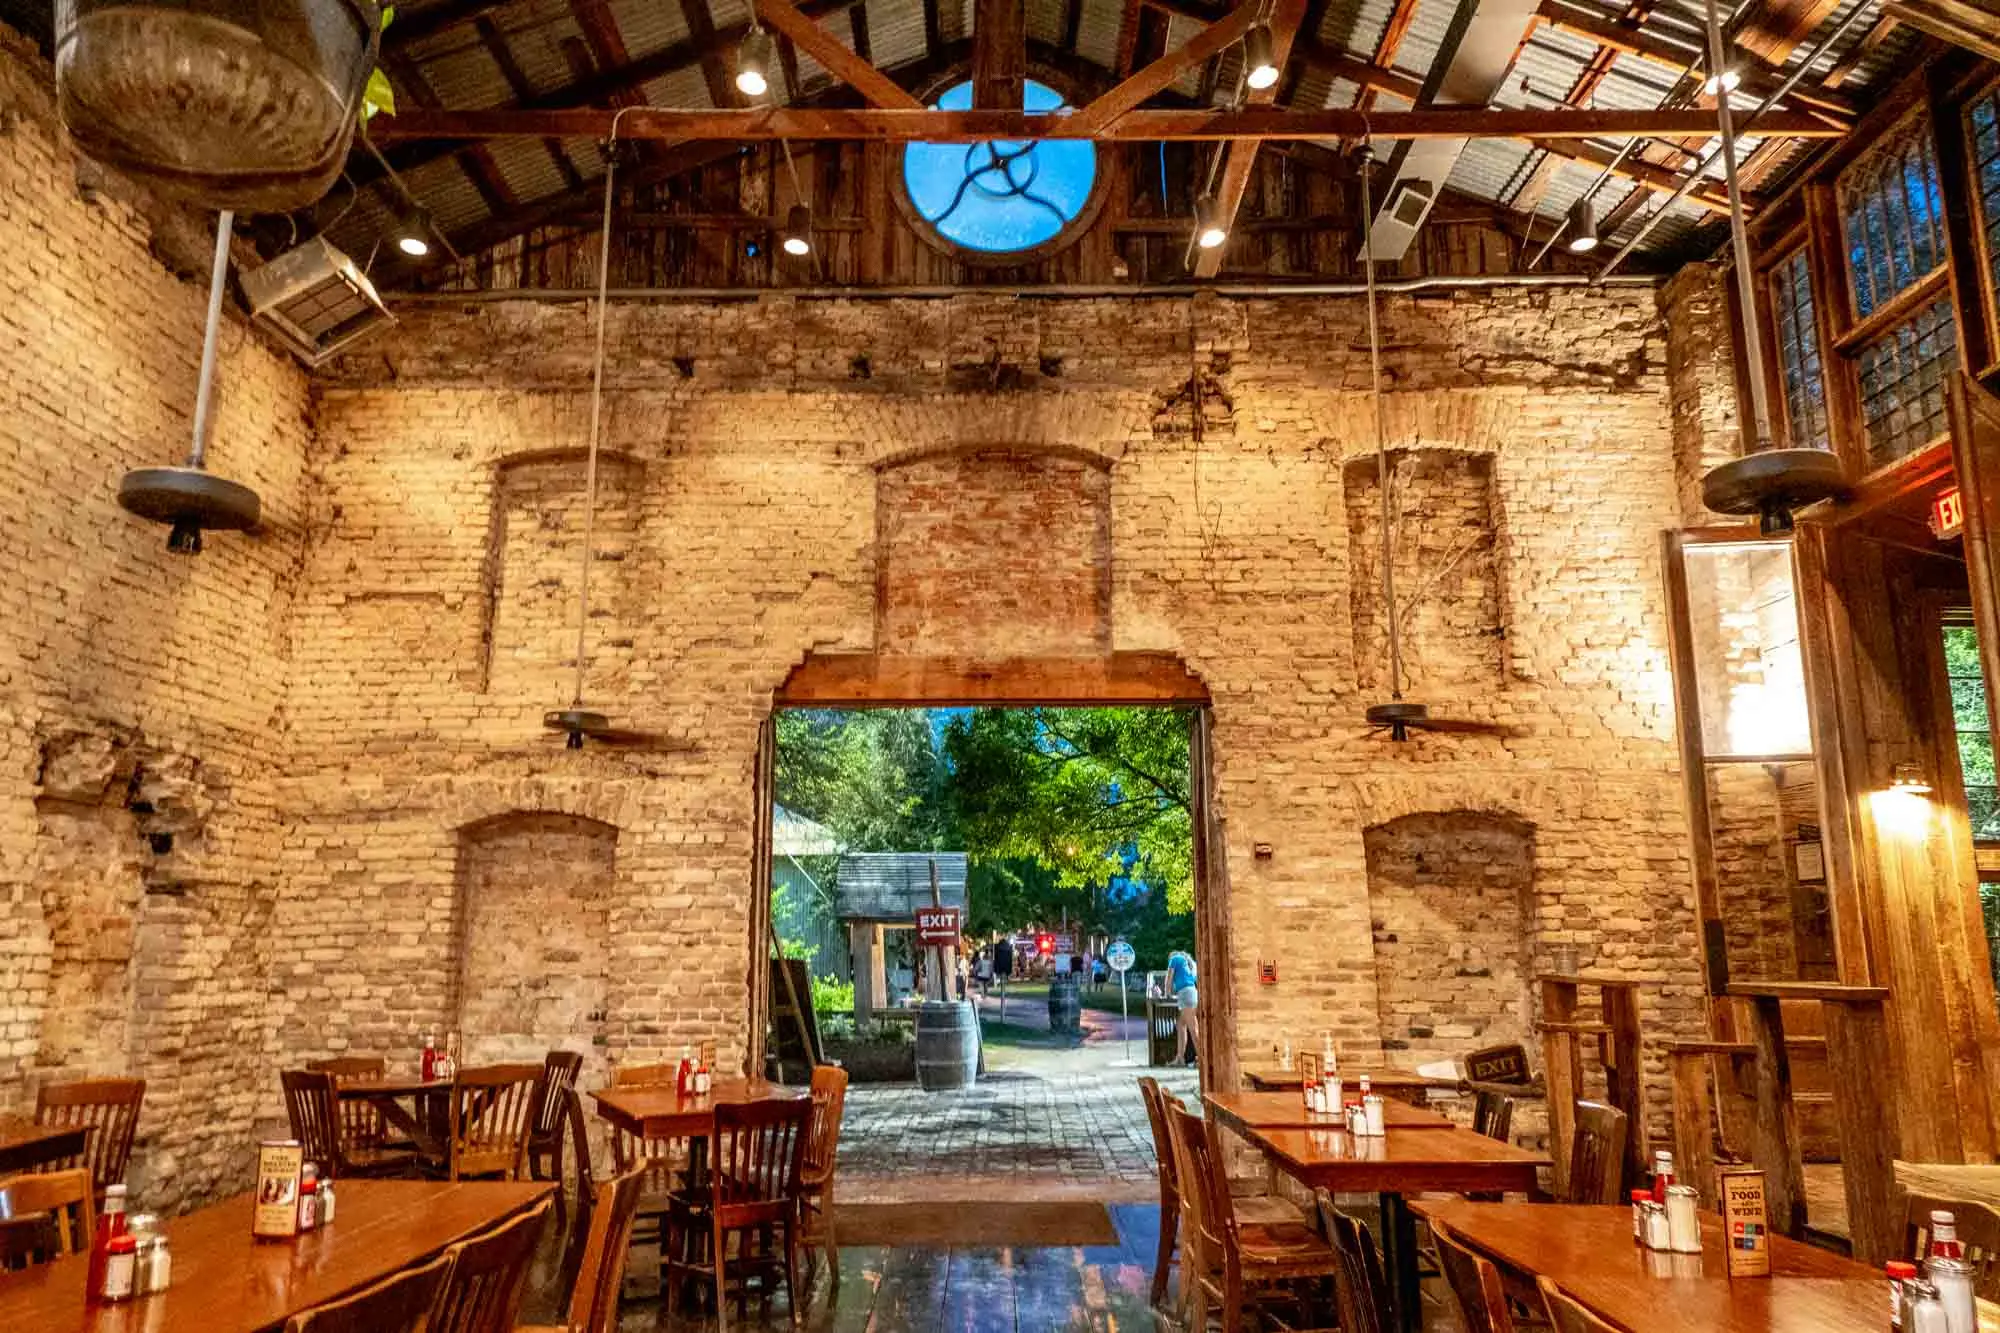 Inside a room with white brick walls filled with restaurant tables and chairs